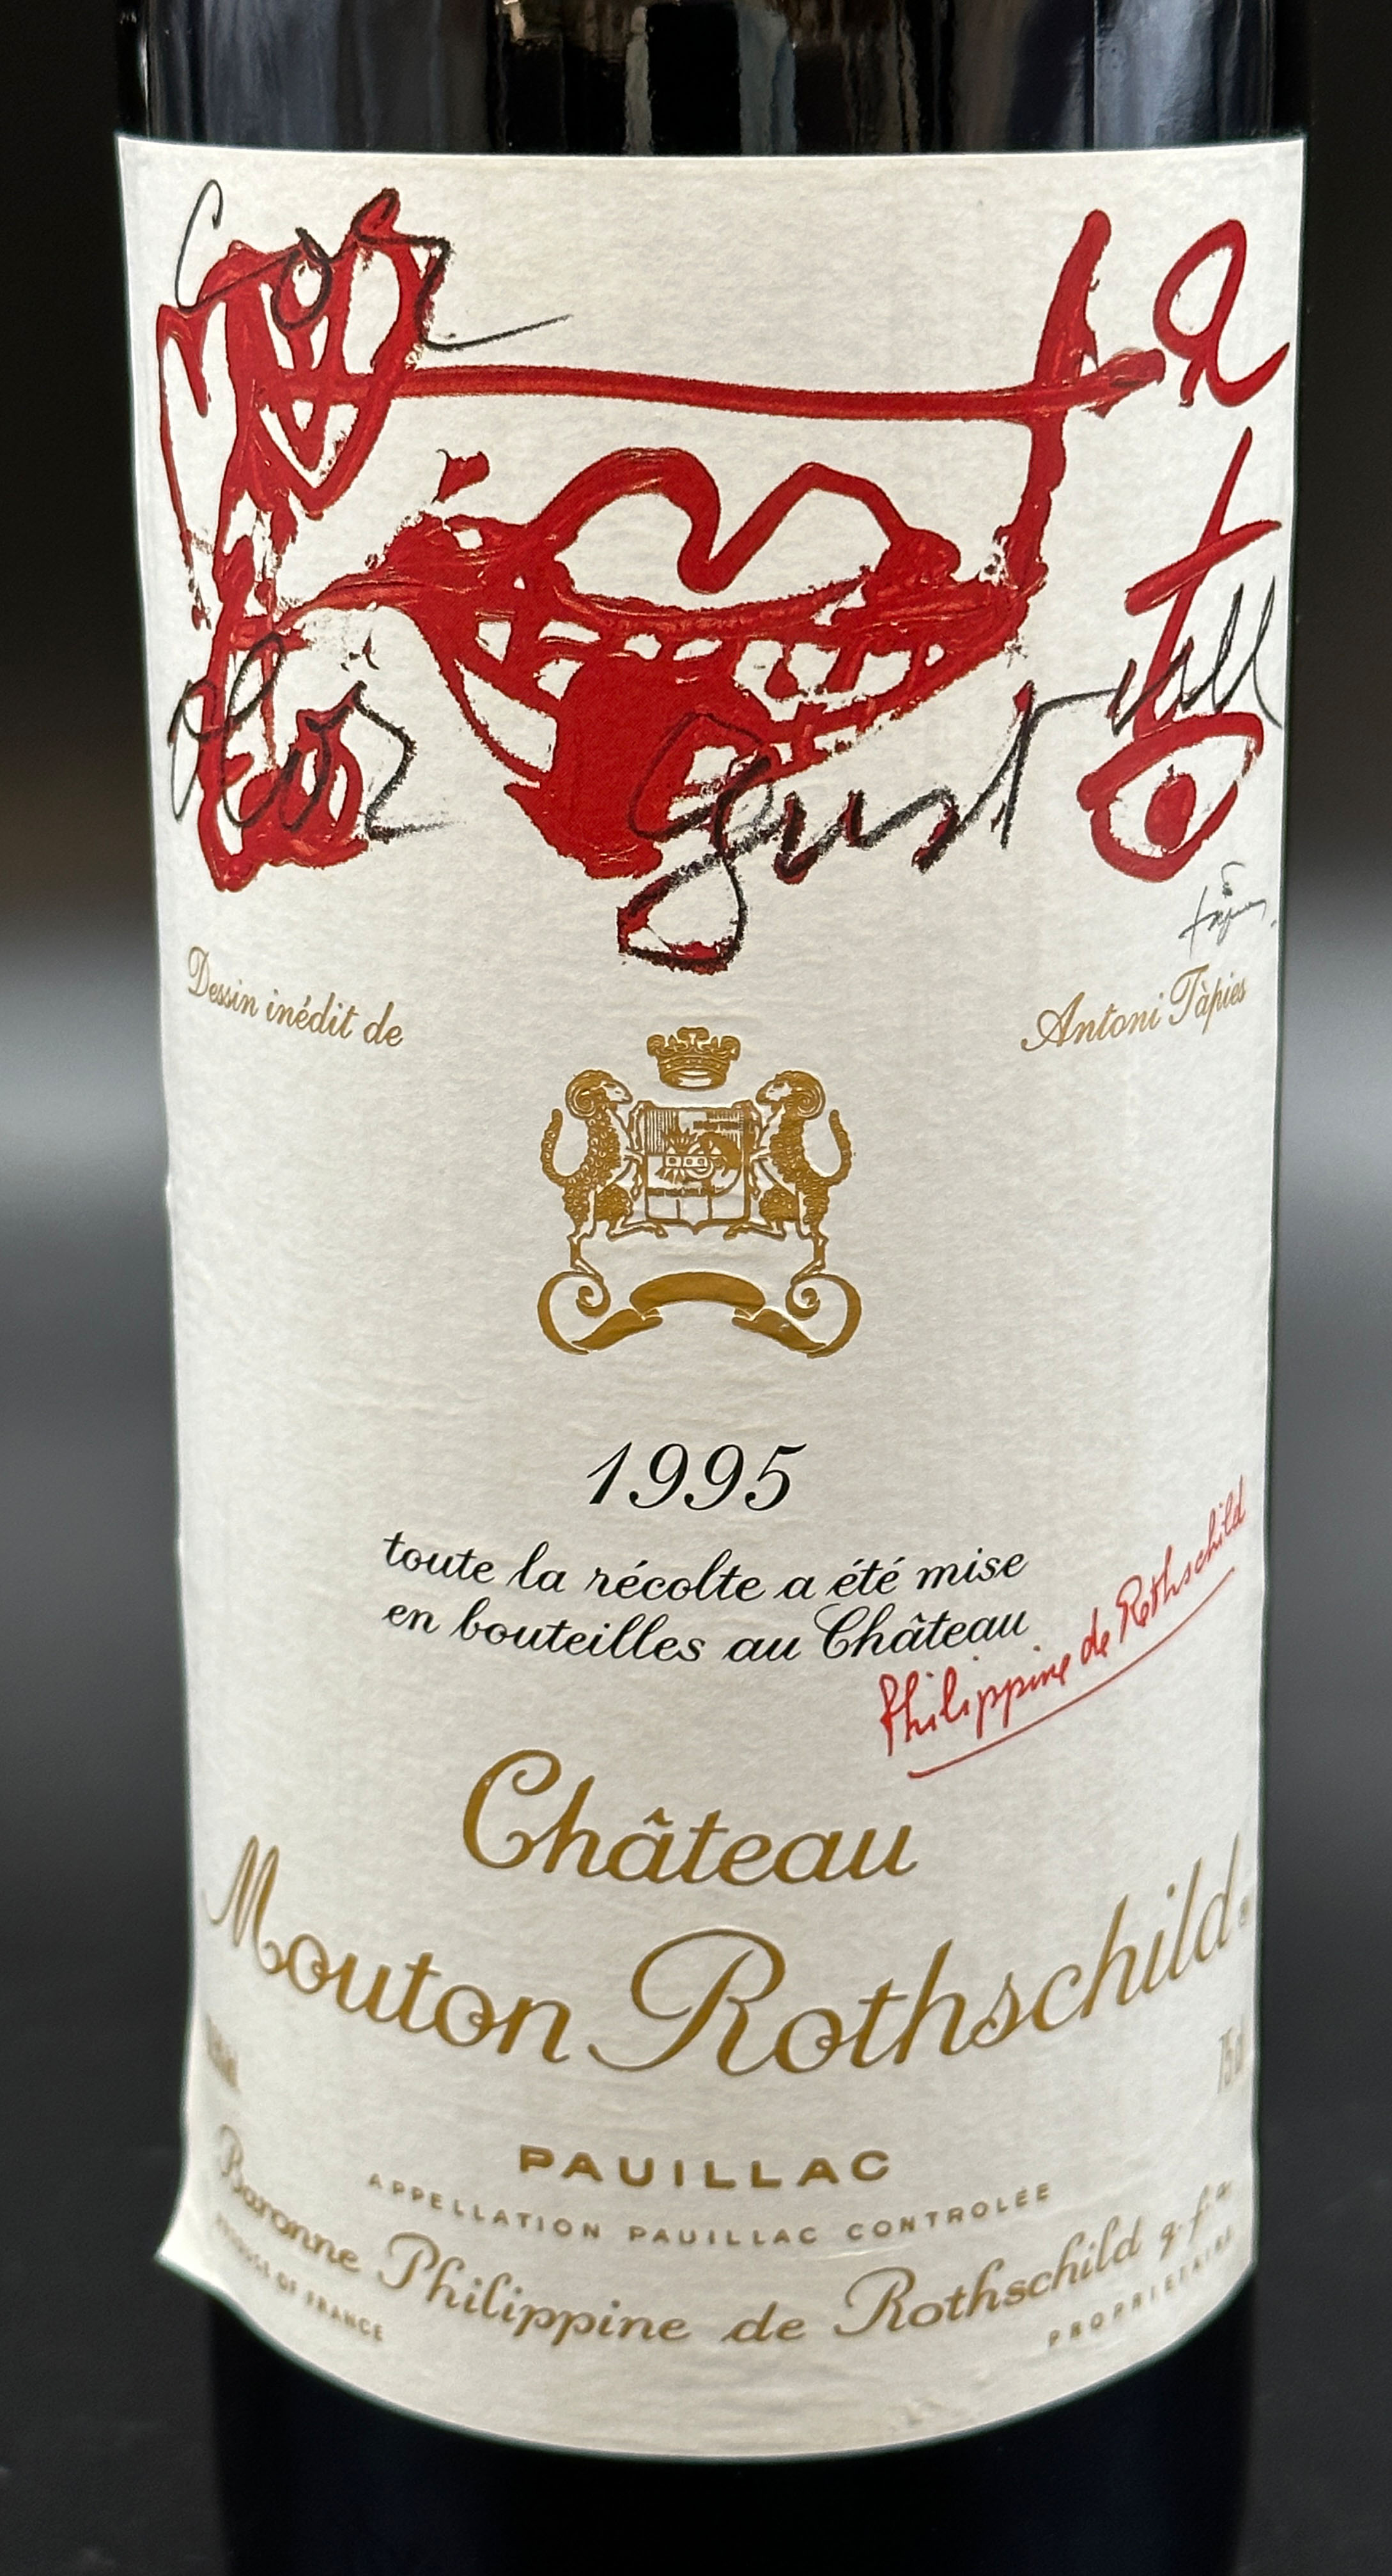 1 bottle of red wine. Château Mouton ROTHSCHILD. Paulliac. 1995. France. - Image 2 of 3